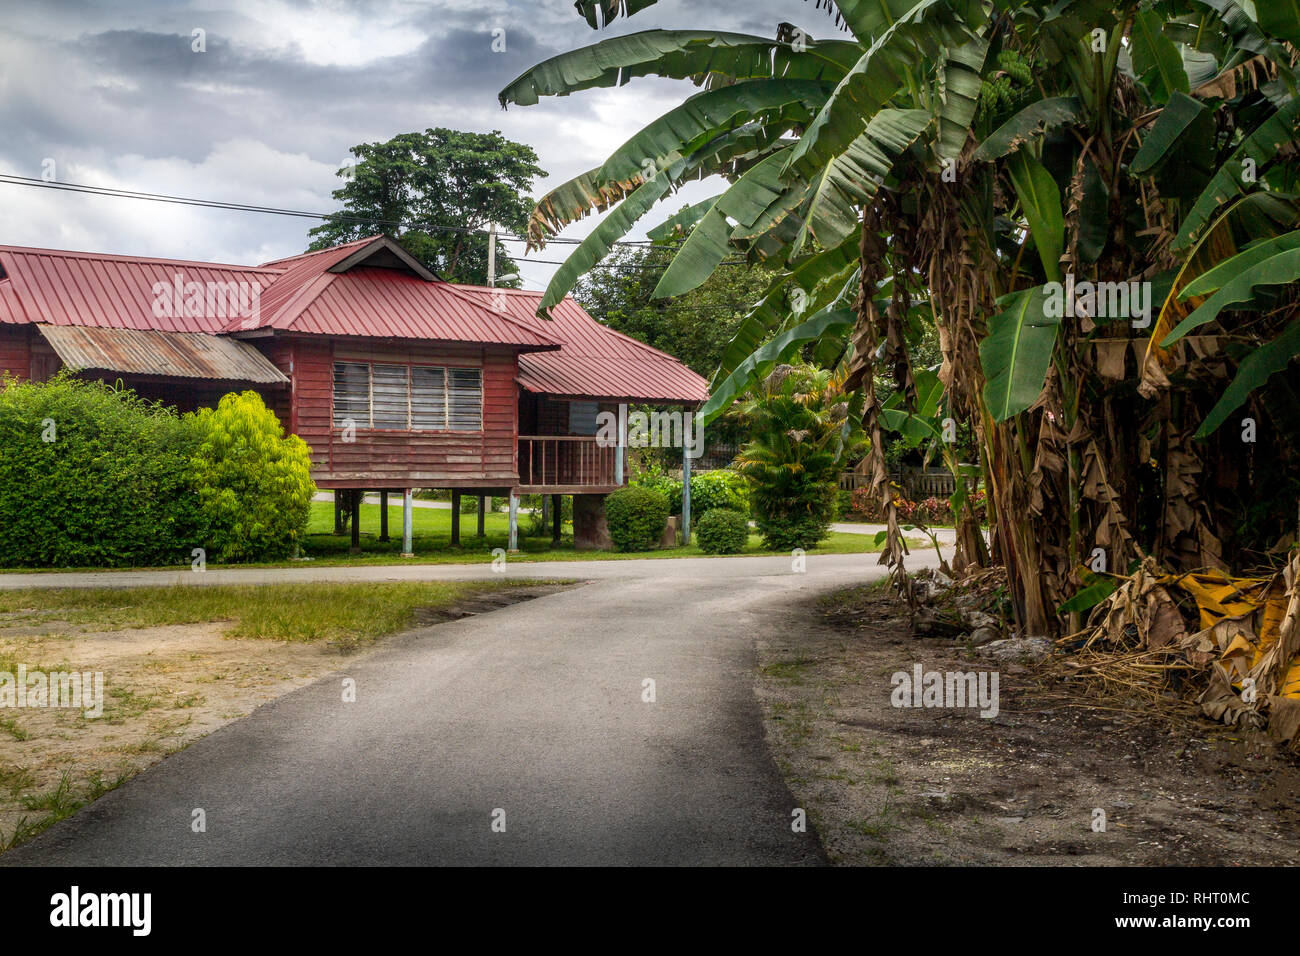 Traditional Malay house in kampung of Malaysia Stock Photo